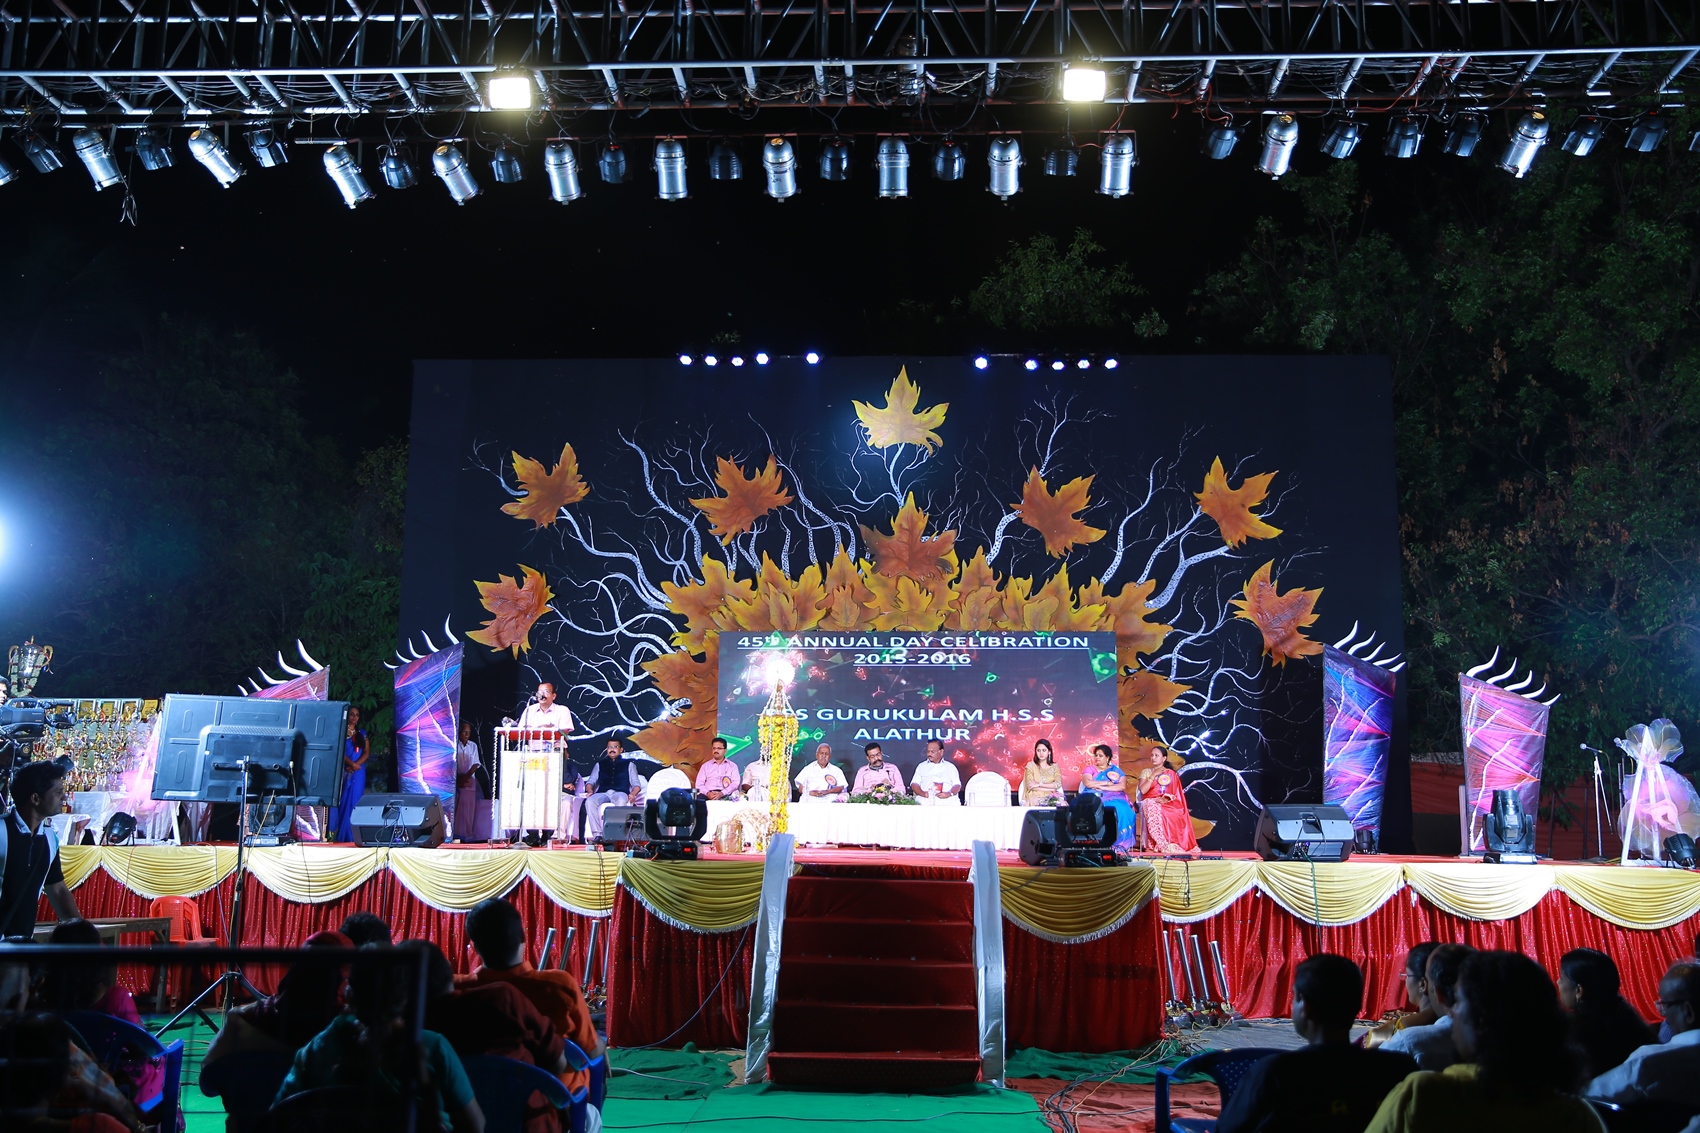 Annual day and Award Night inauguration ceremony 2016-2017